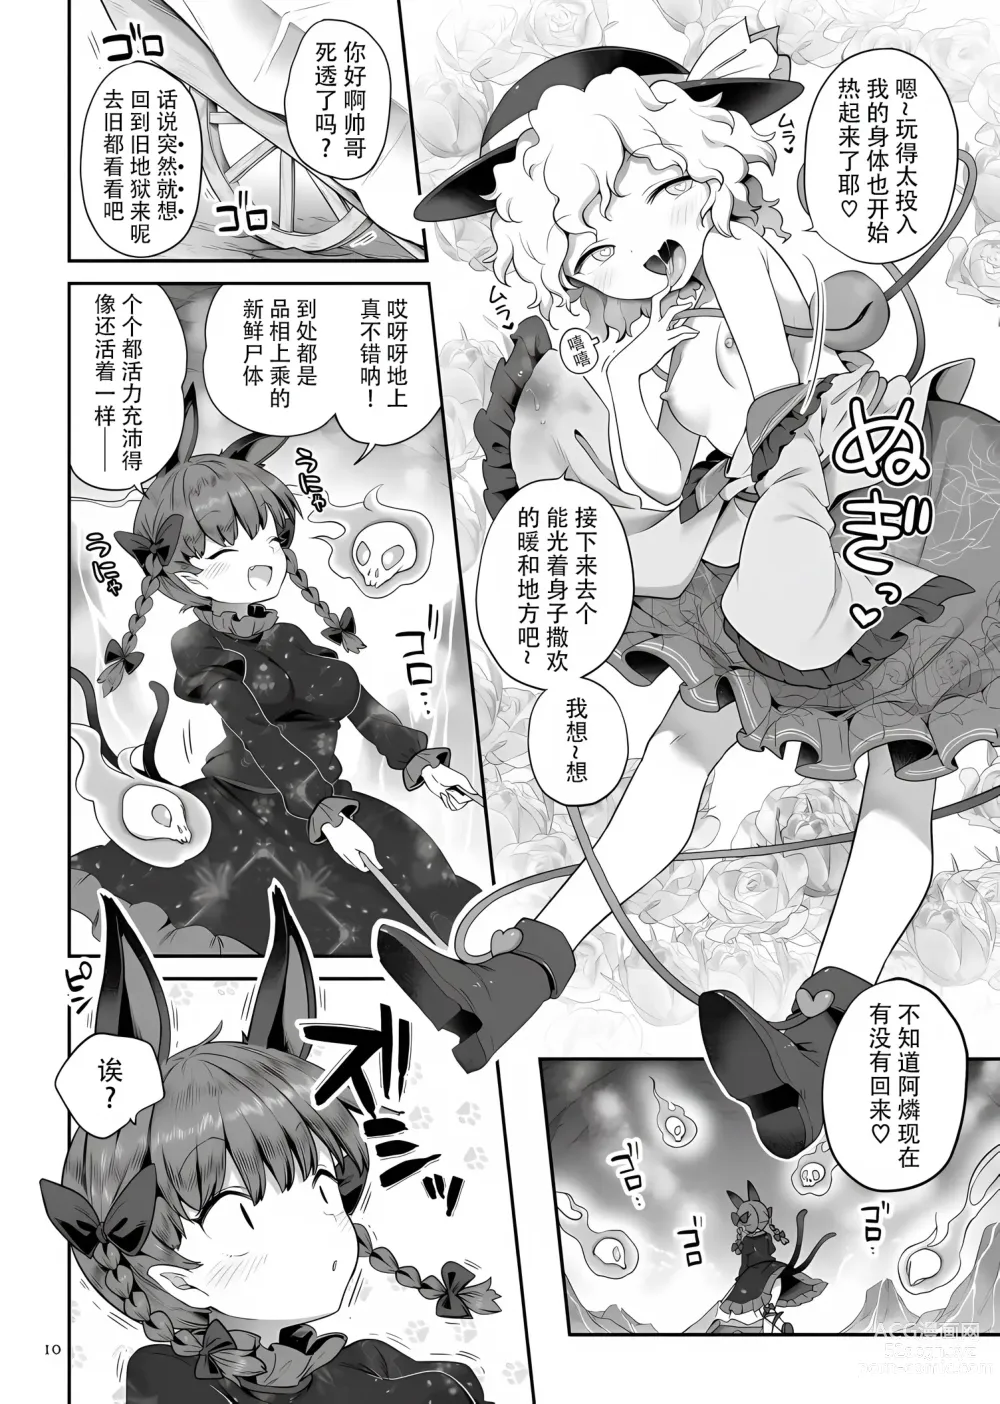 Page 10 of doujinshi [Unmei no Ikasumi (Harusame) Super Id (Touhou Project) [Chinese] [79%汉化组] [Digital]